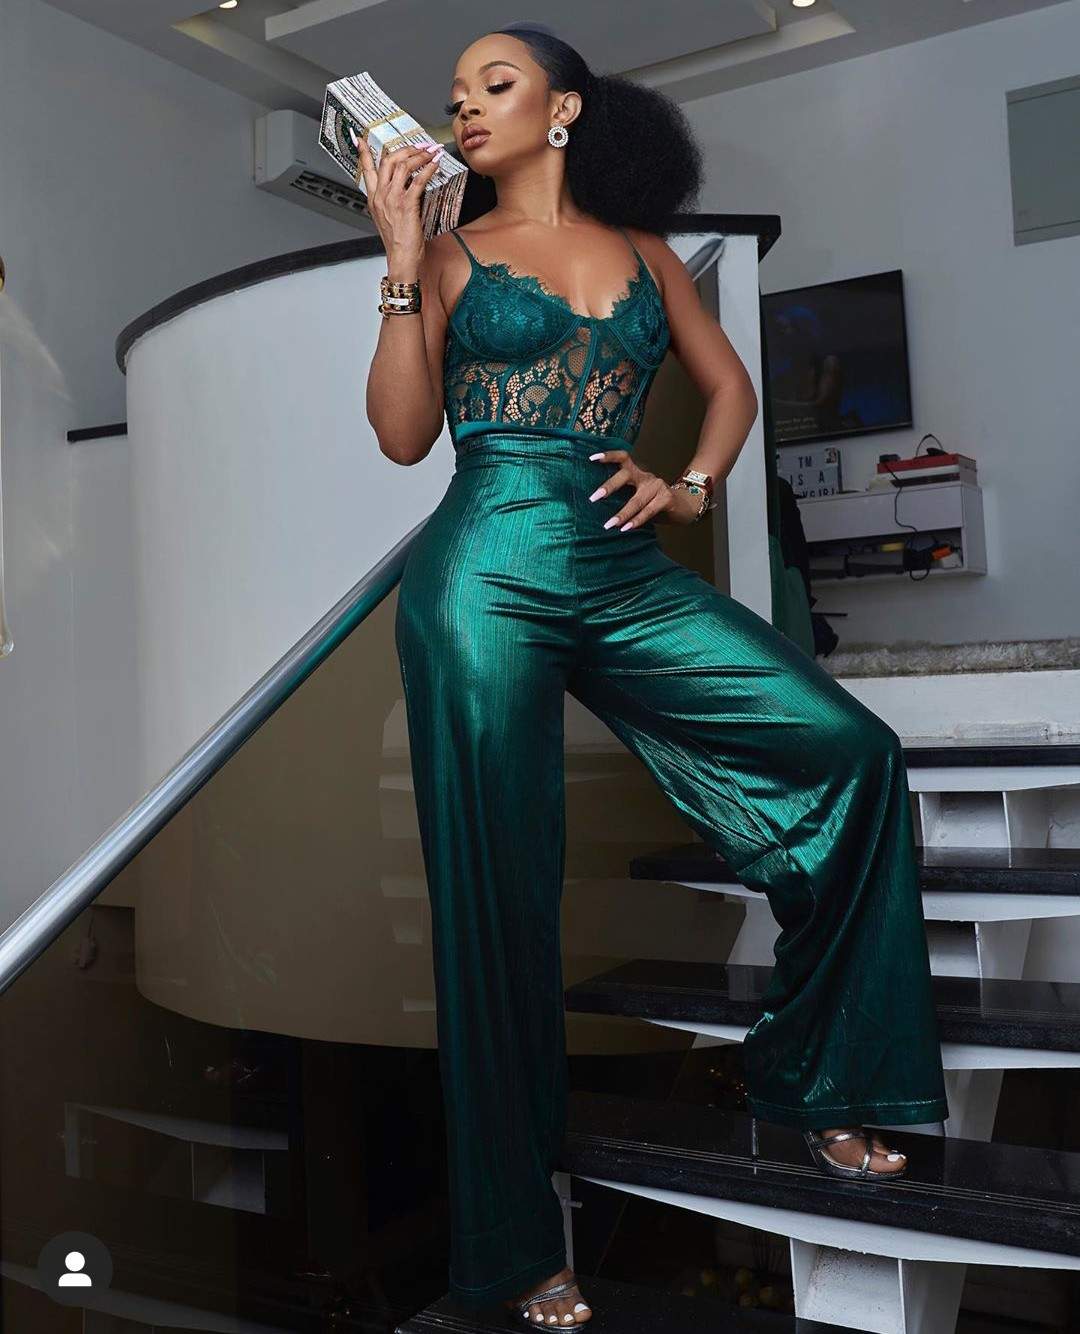 "If you cheat on me and think I will be ashamed, you haven't met me" - Toke Makinwa writes